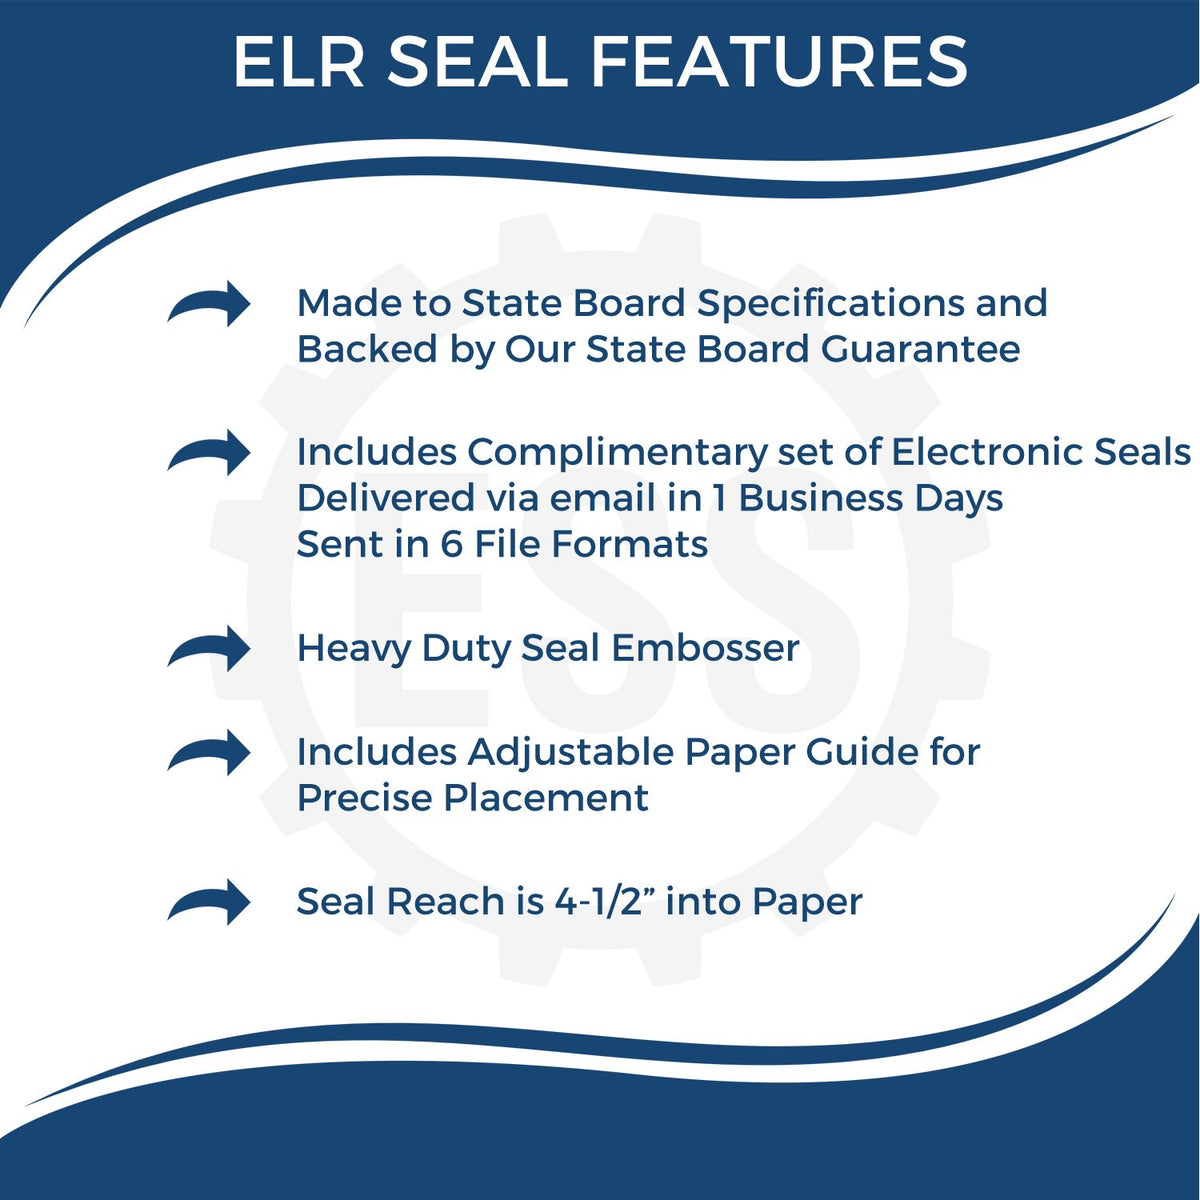 A picture of an infographic highlighting the selling points for the State of Ohio Extended Long Reach Engineer Seal